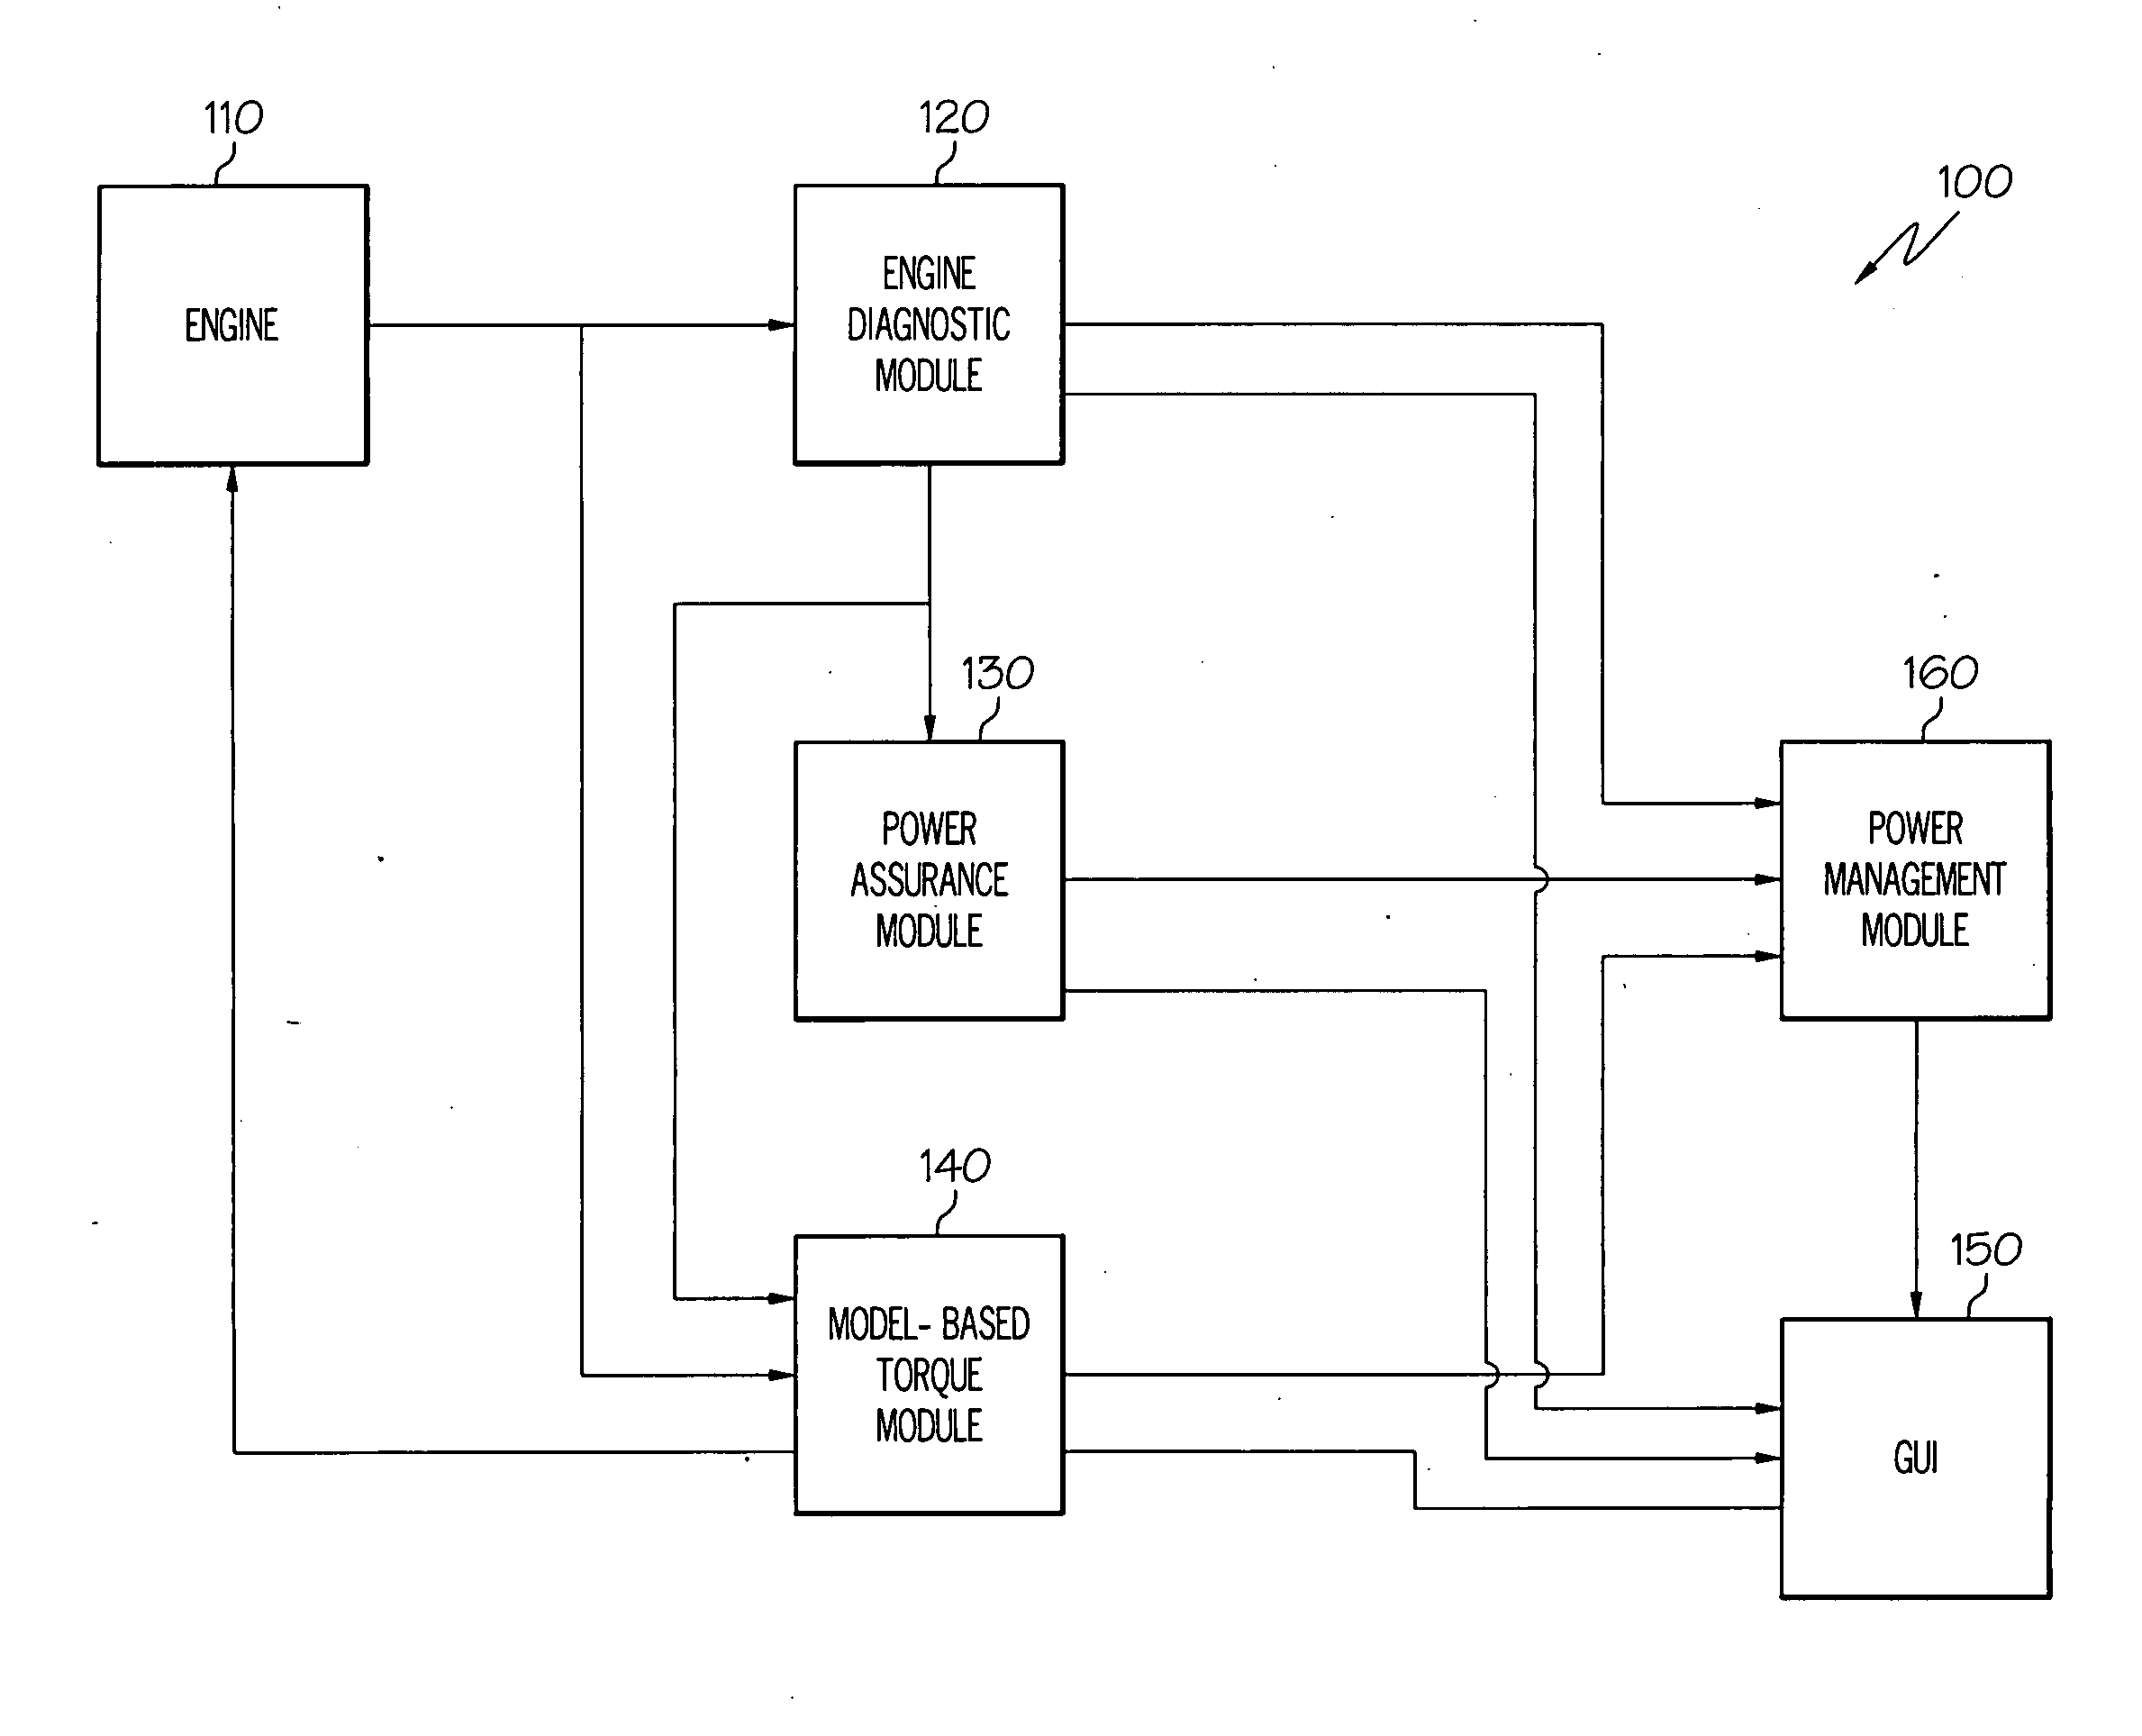 Operations support systems and methods with power management